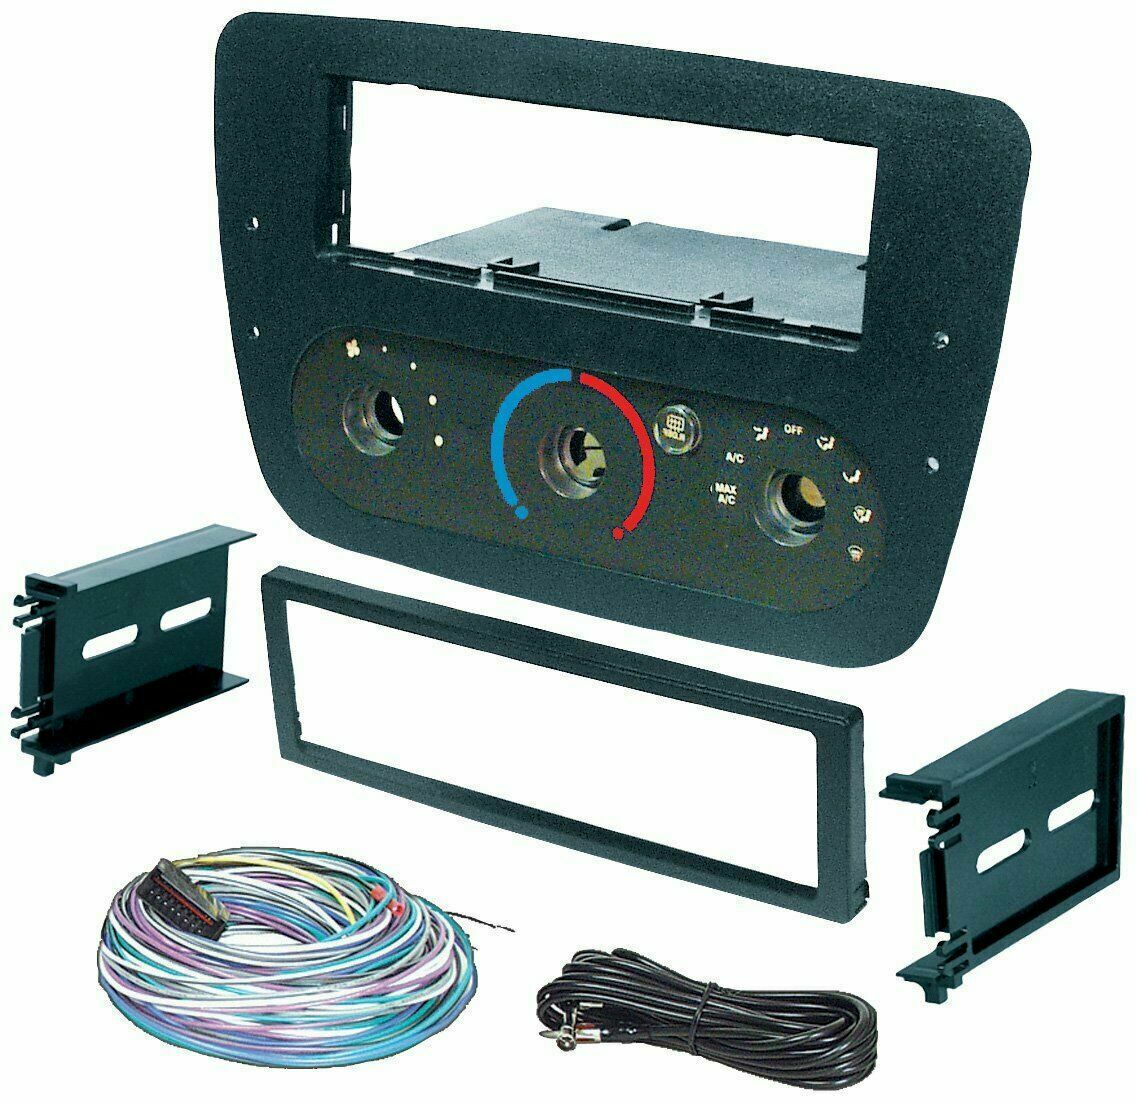 MK Audio M FMK578 Car Installation Dash Kit compatible with 00-up Ford Taurus Mercury Sable